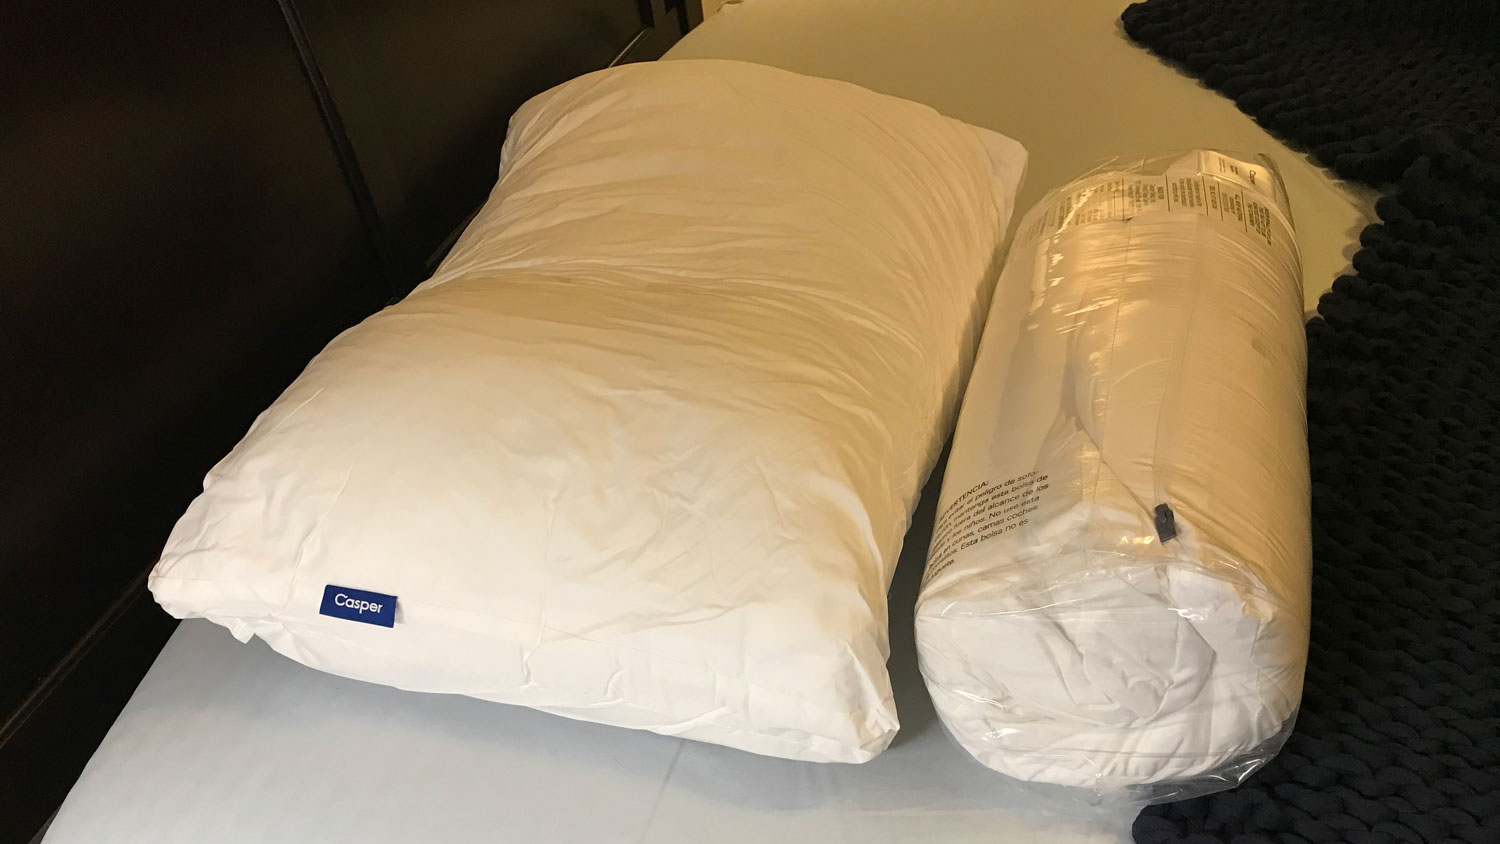 Two Casper Down Pillows, one rolled up in its shrinkwrap